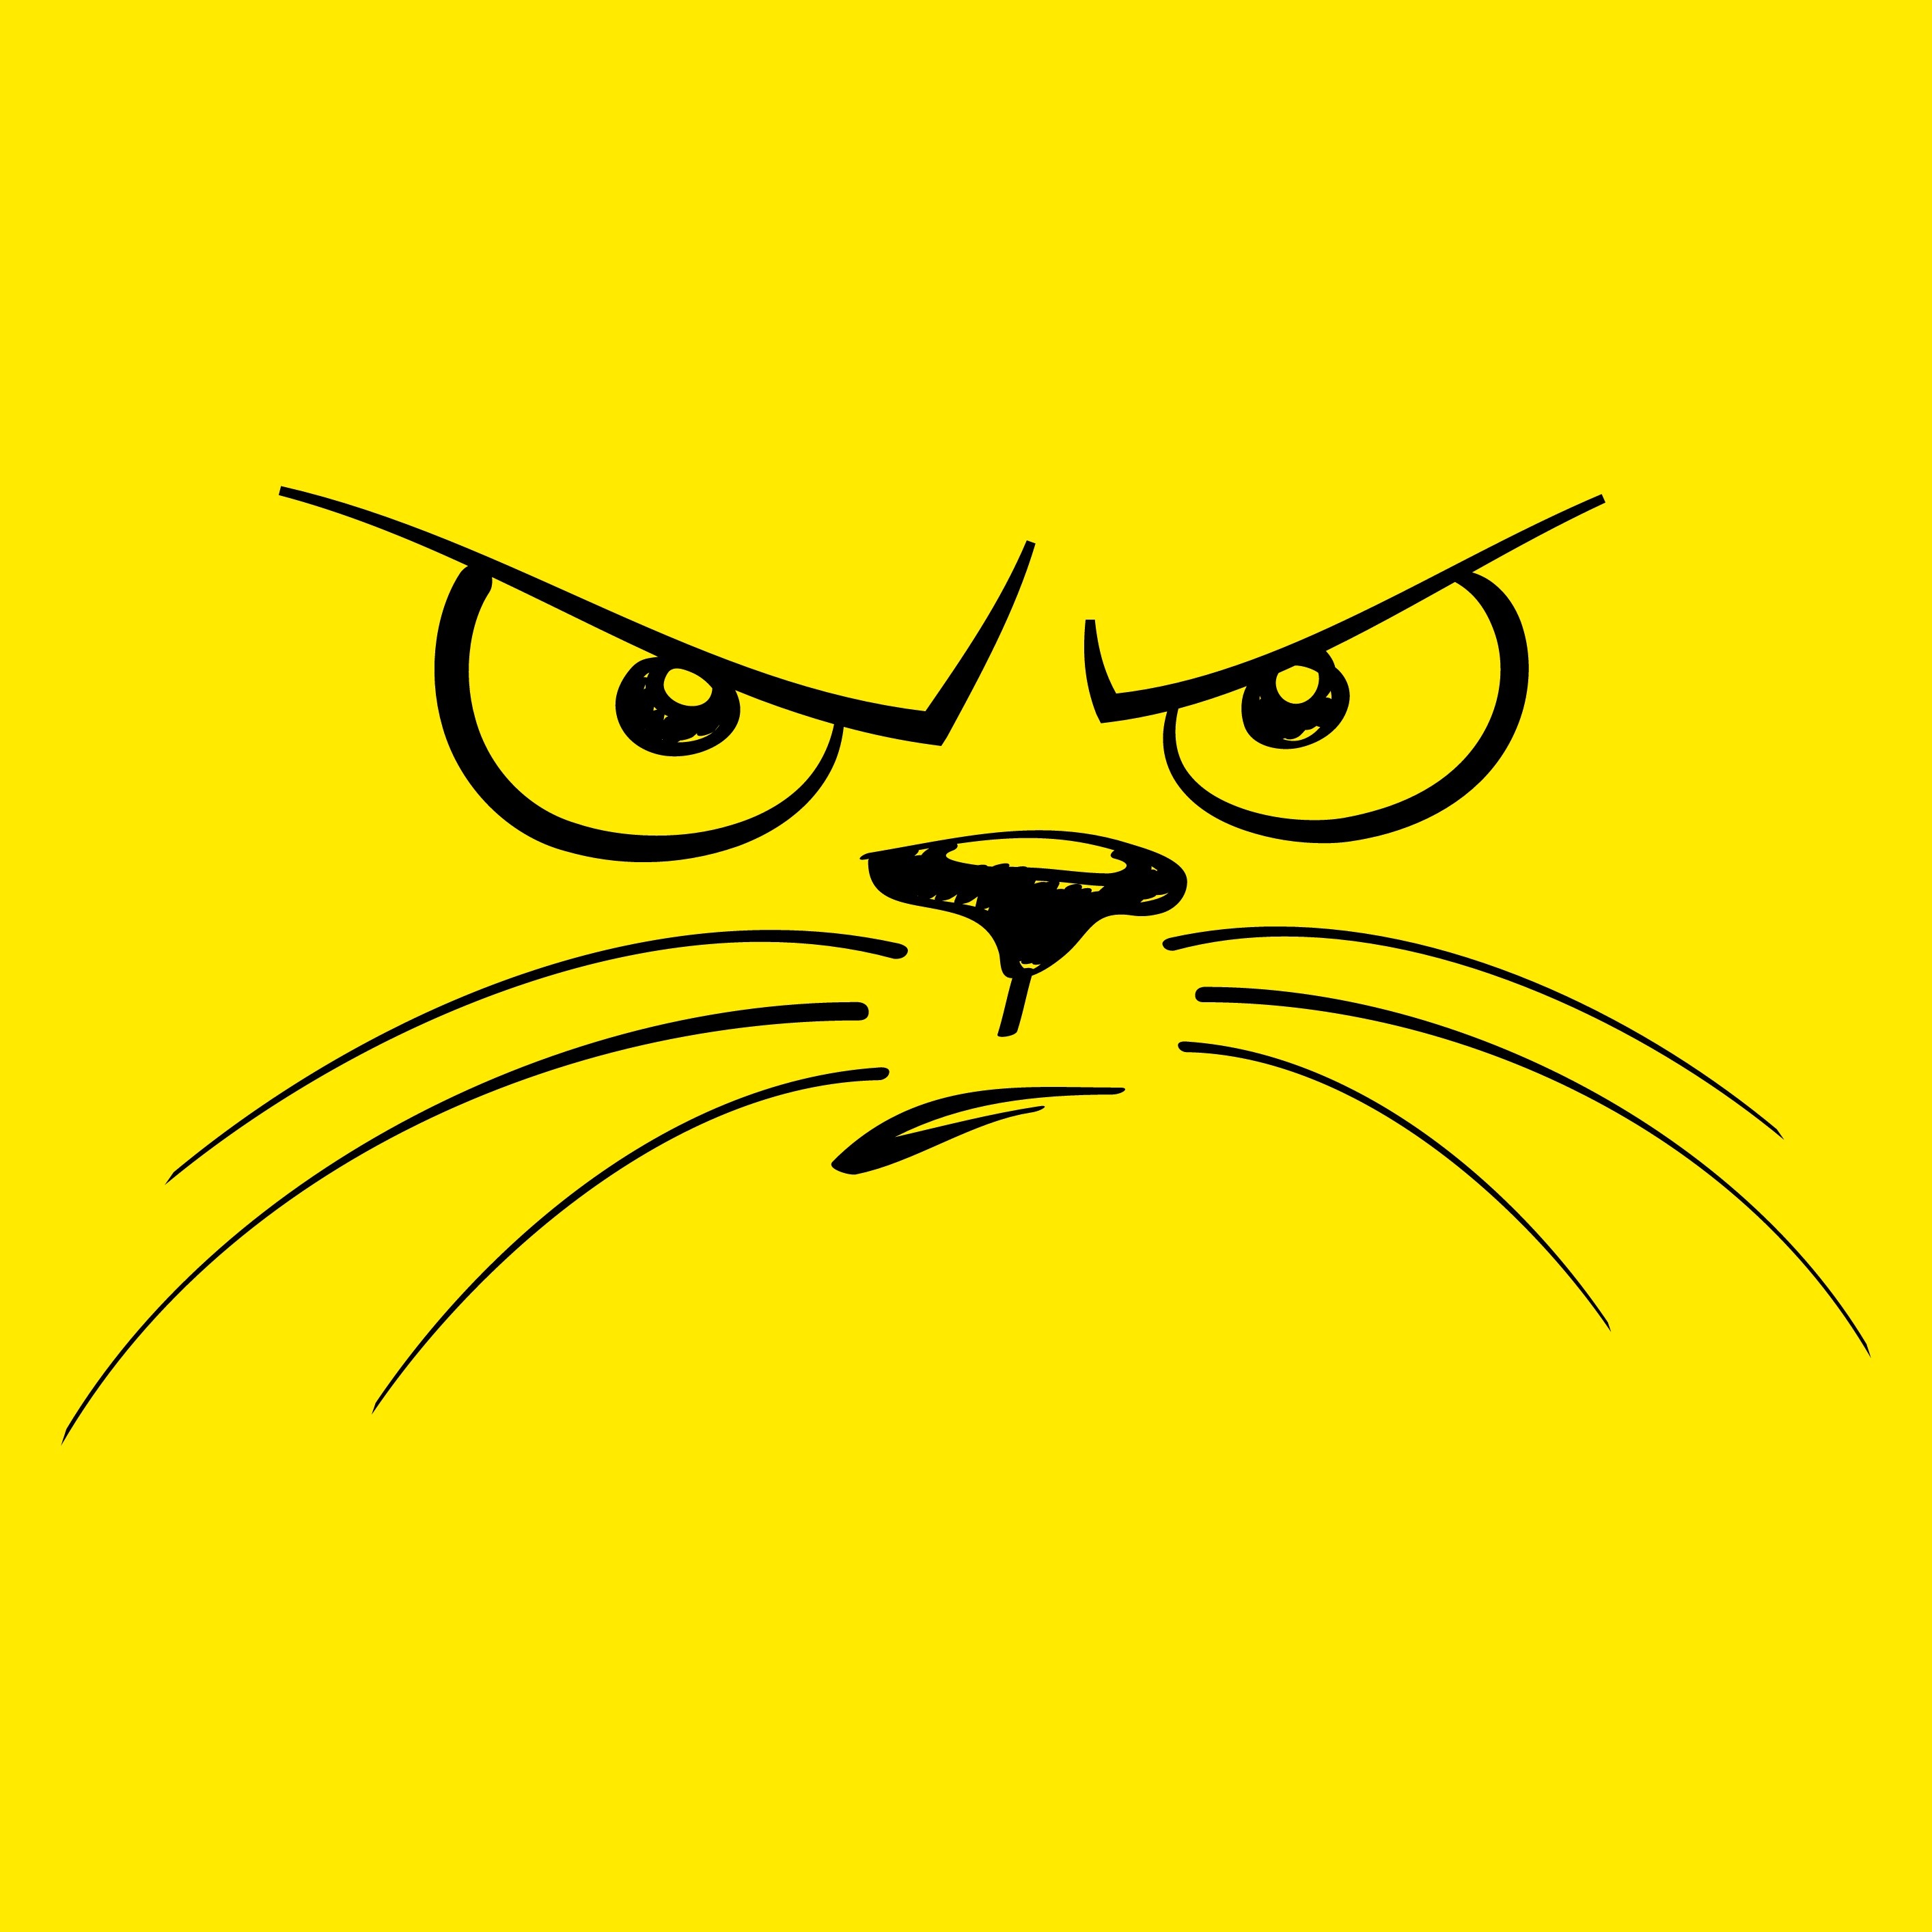 art, cat, emoticon, smiley, evil, dissatisfied, discontented iphone wallpaper